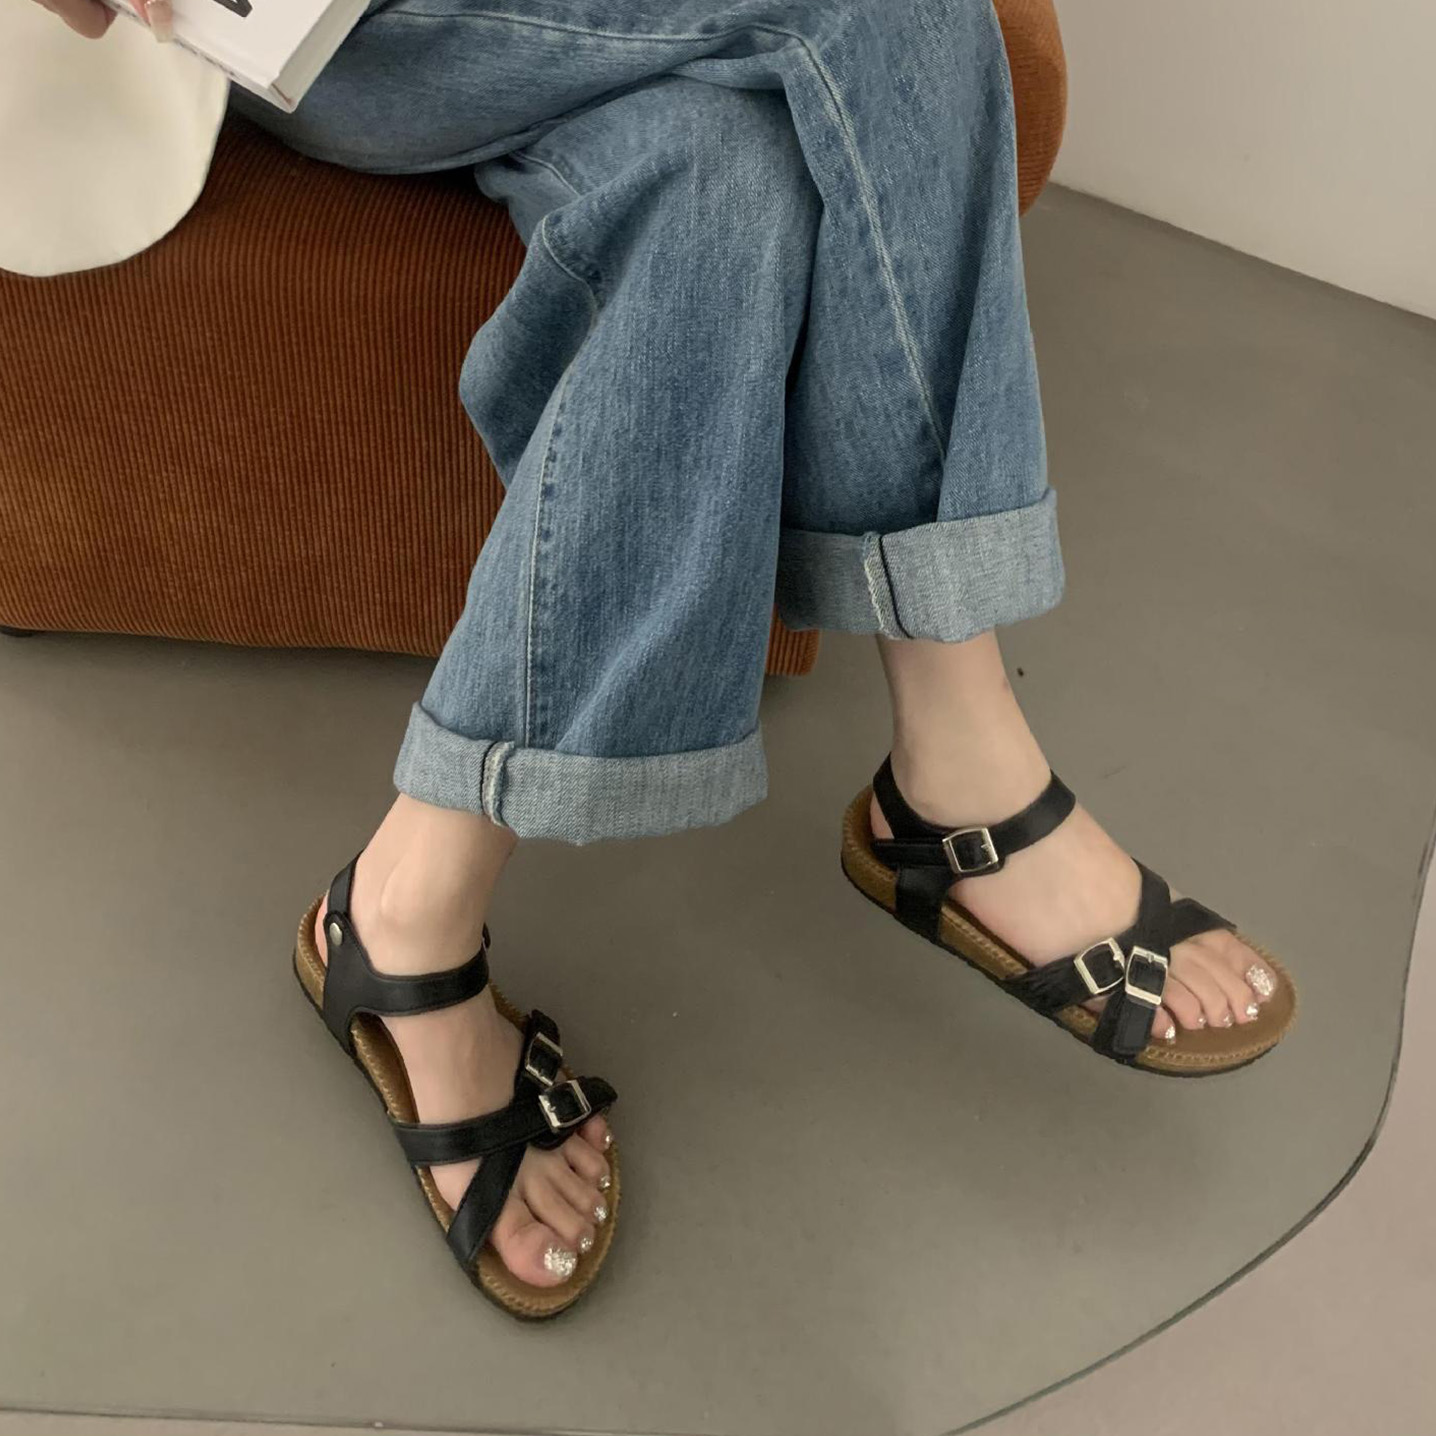 Versatile and adaptable for various outfits Wedge Sandals Effortlessly chic and trendy